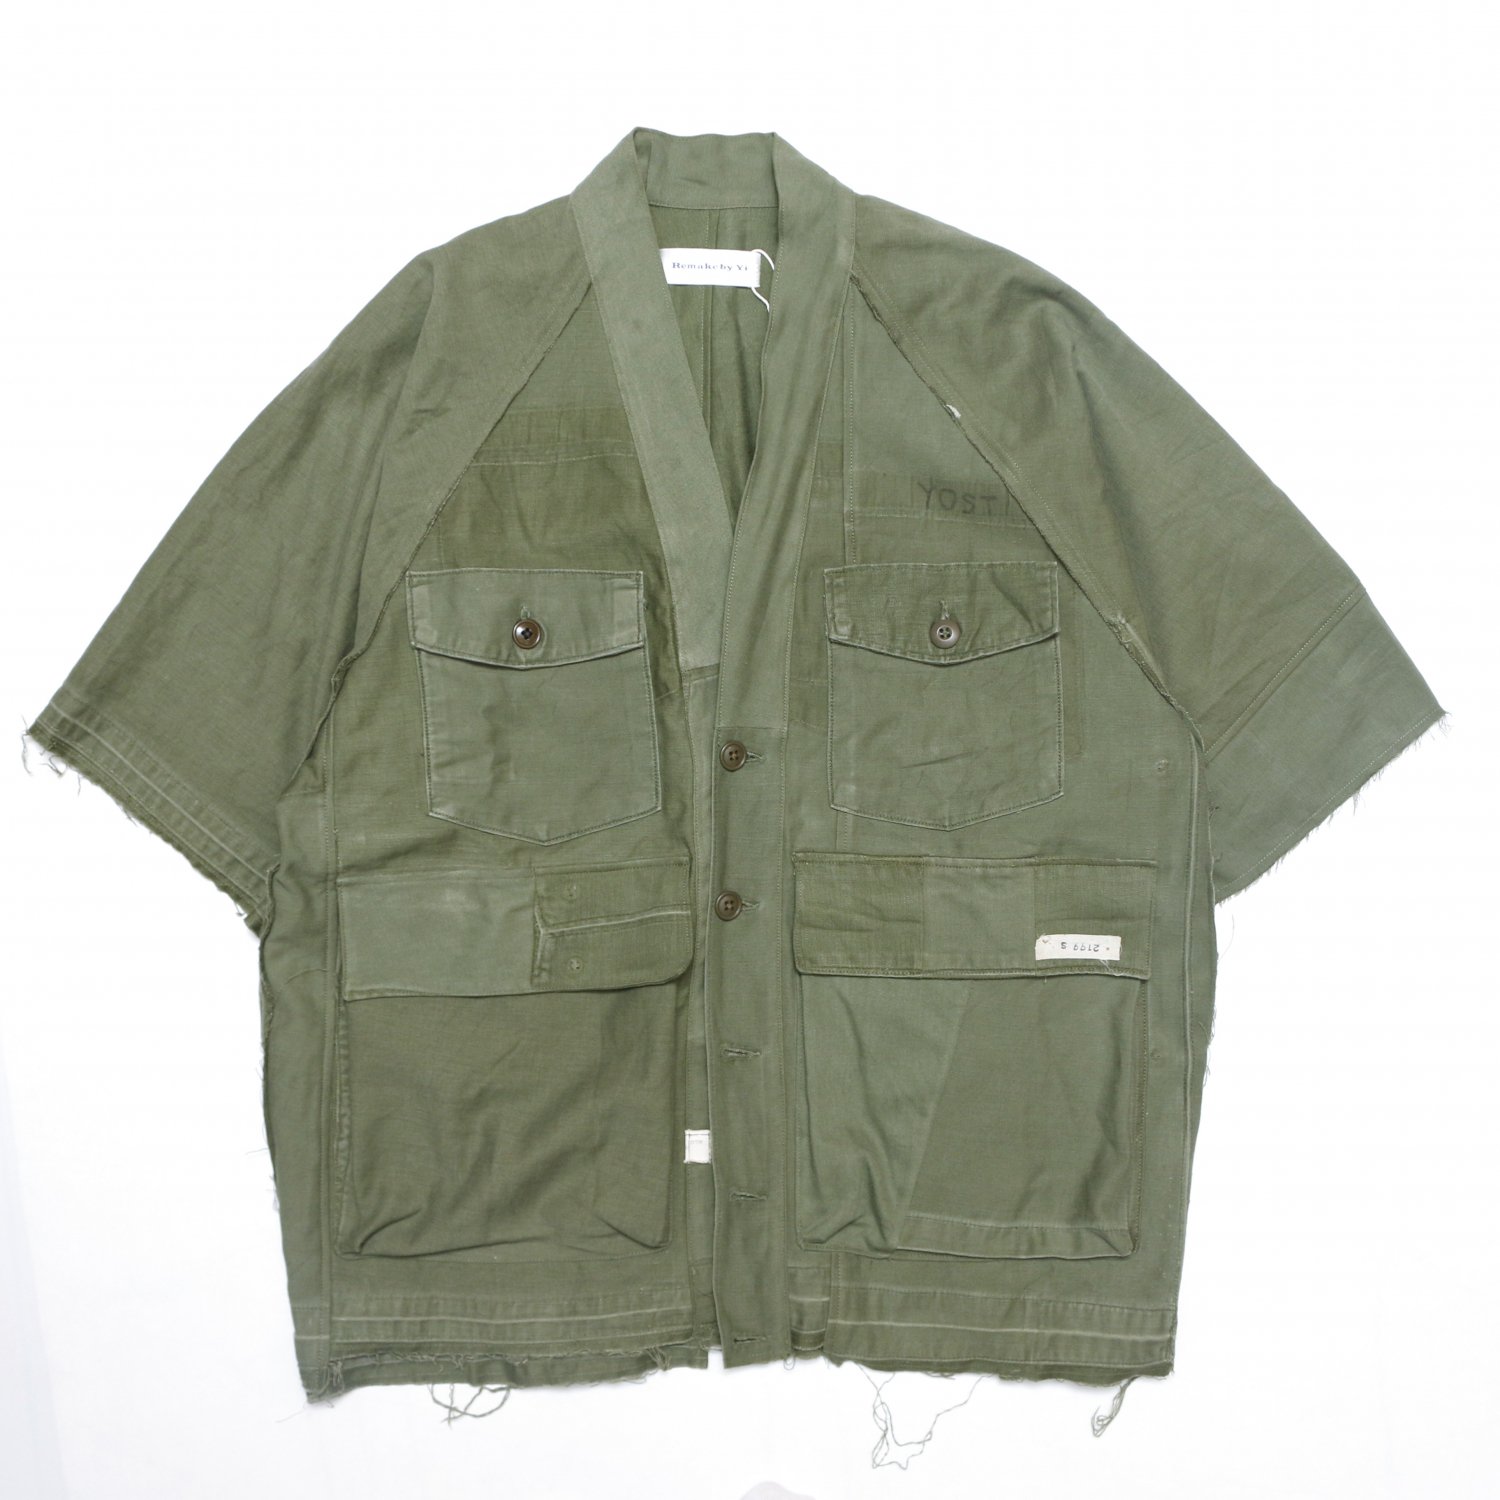 <img class='new_mark_img1' src='https://img.shop-pro.jp/img/new/icons8.gif' style='border:none;display:inline;margin:0px;padding:0px;width:auto;' />Remake by Yi / Noragi Shirt (US ARMY OG-107*2)